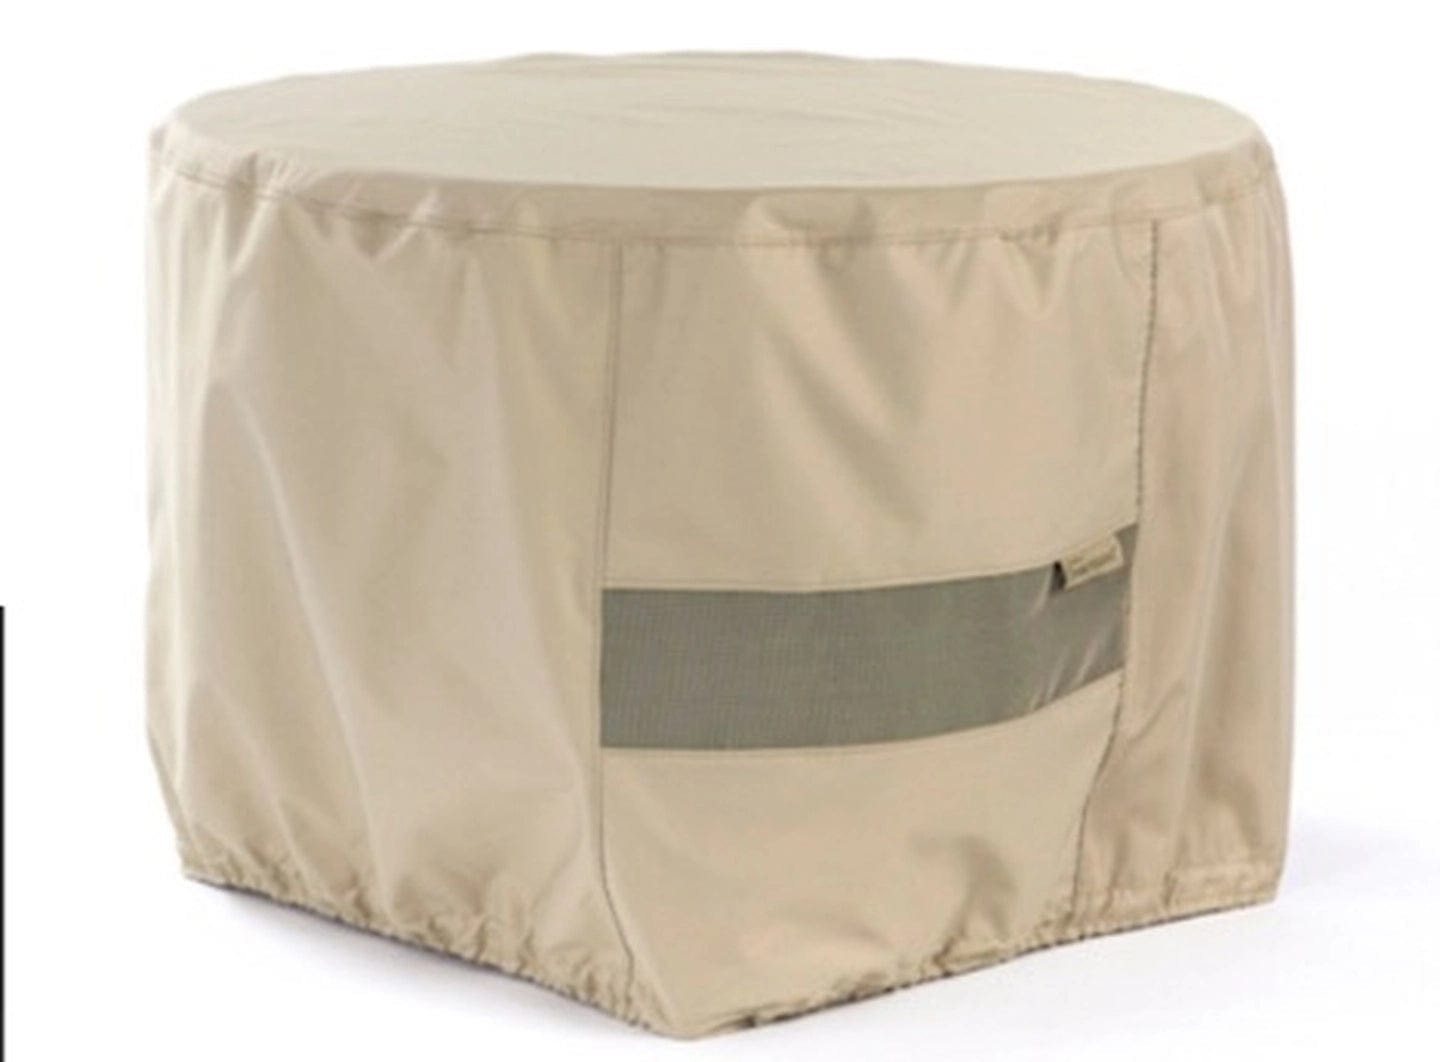 Fire Pit Art FPCover Fire Pit Canvas Cover, 36-Inch